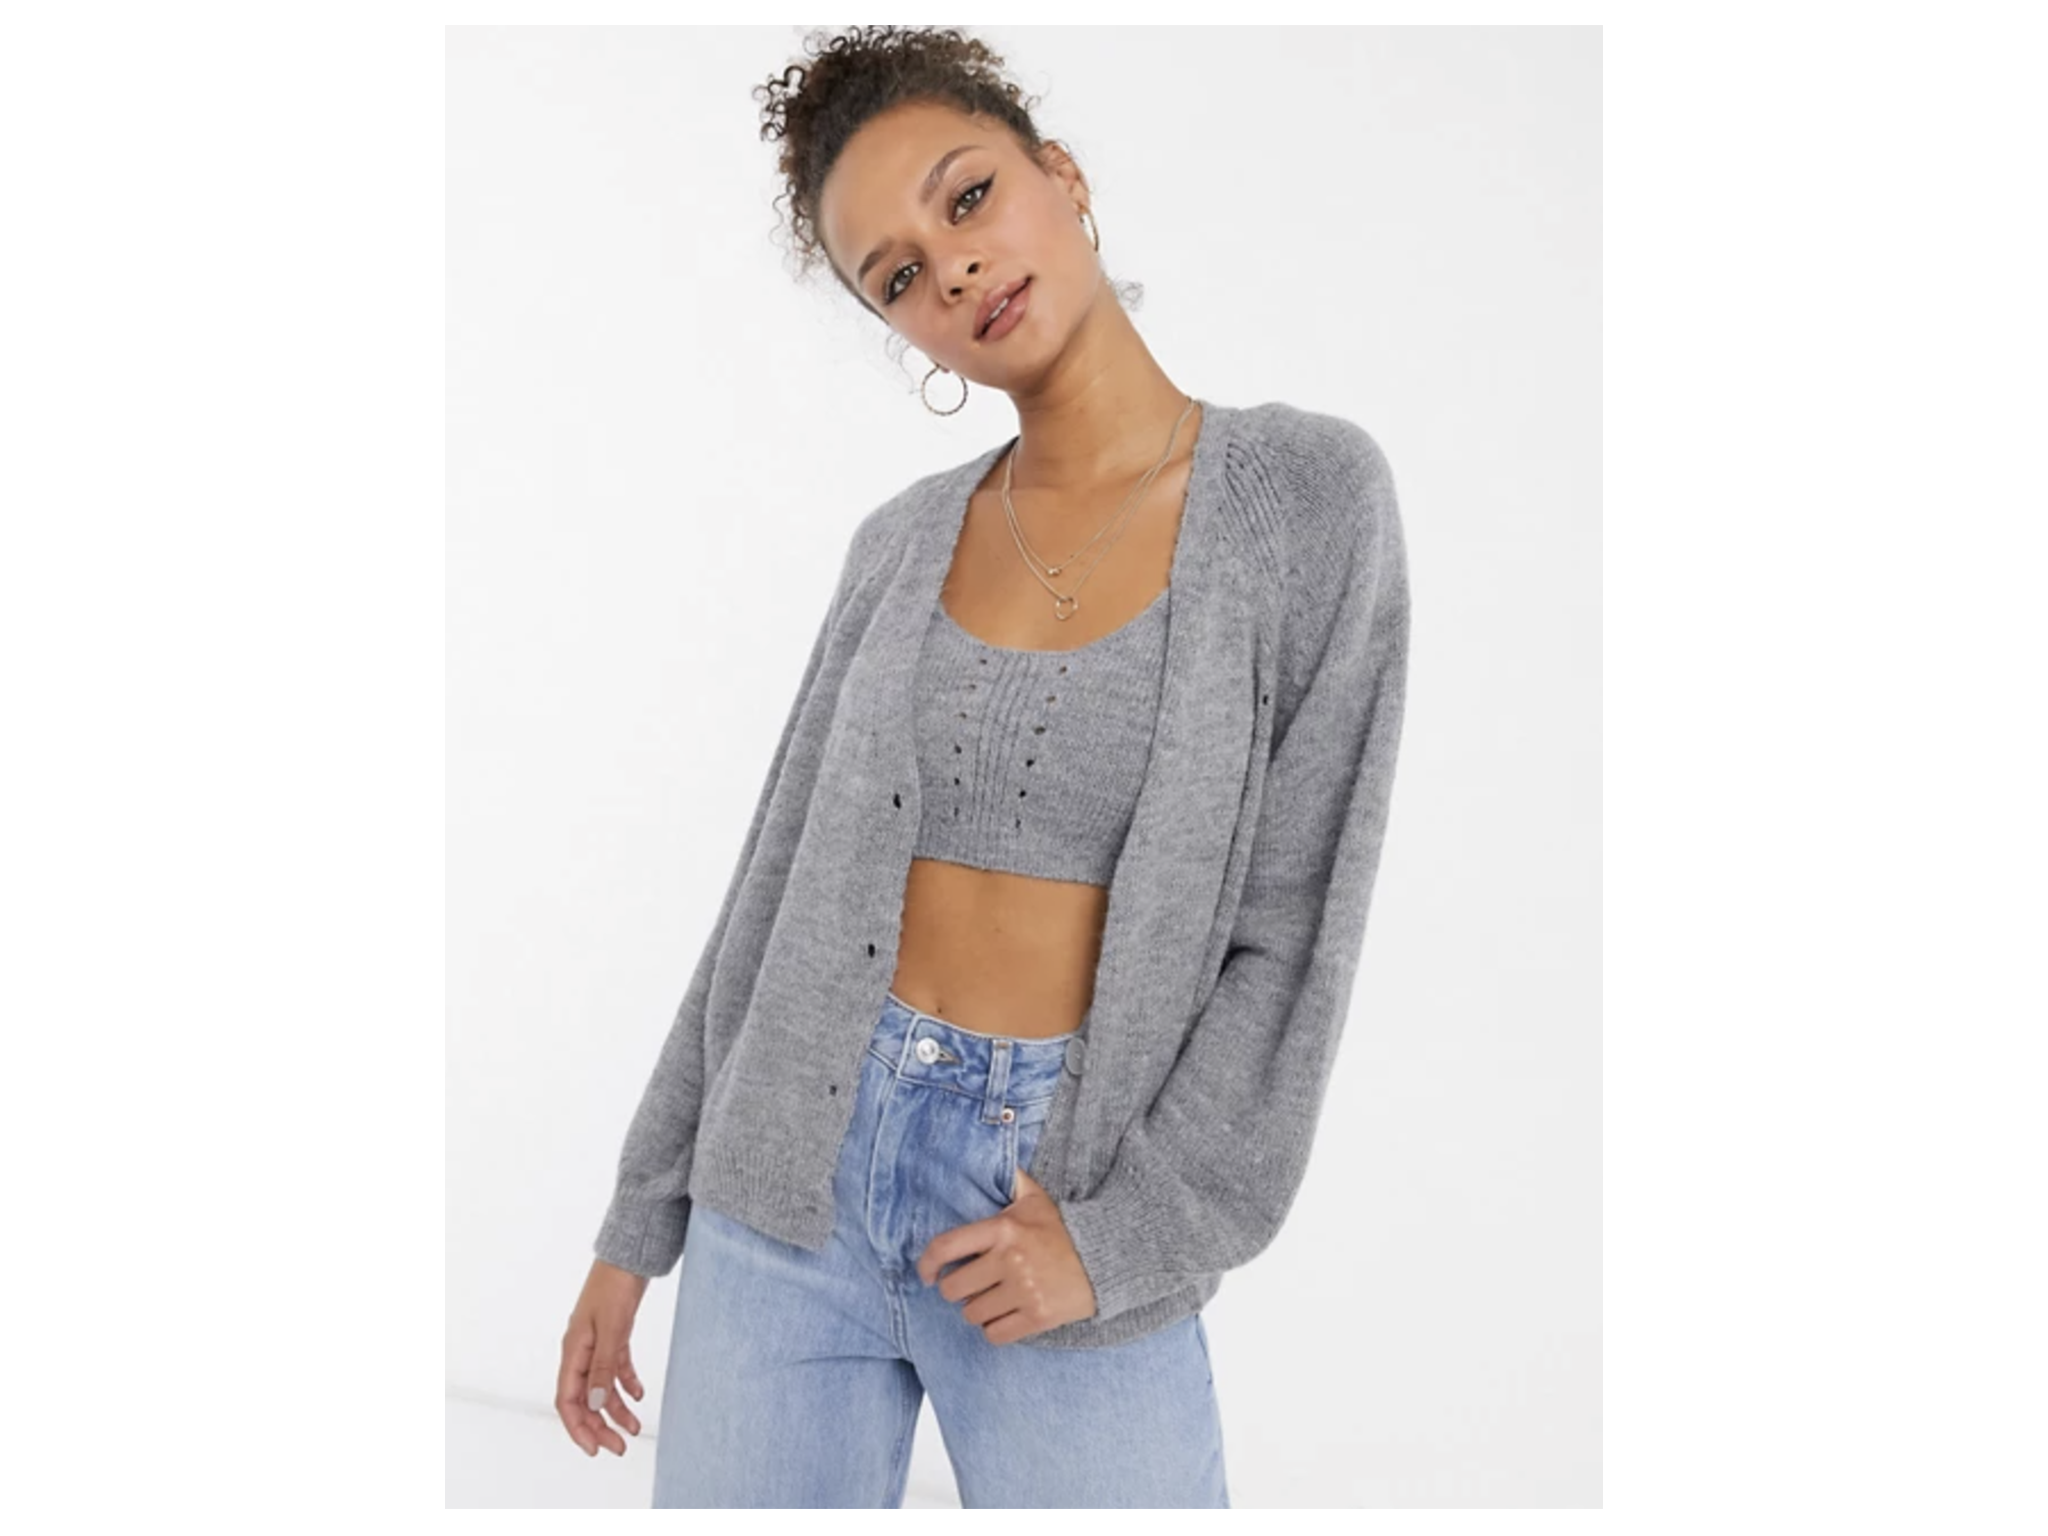 Fashion Slipovers Fine Knitted Cardigans L.O.G.G Fine Knitted Cardigan light grey flecked simple style 